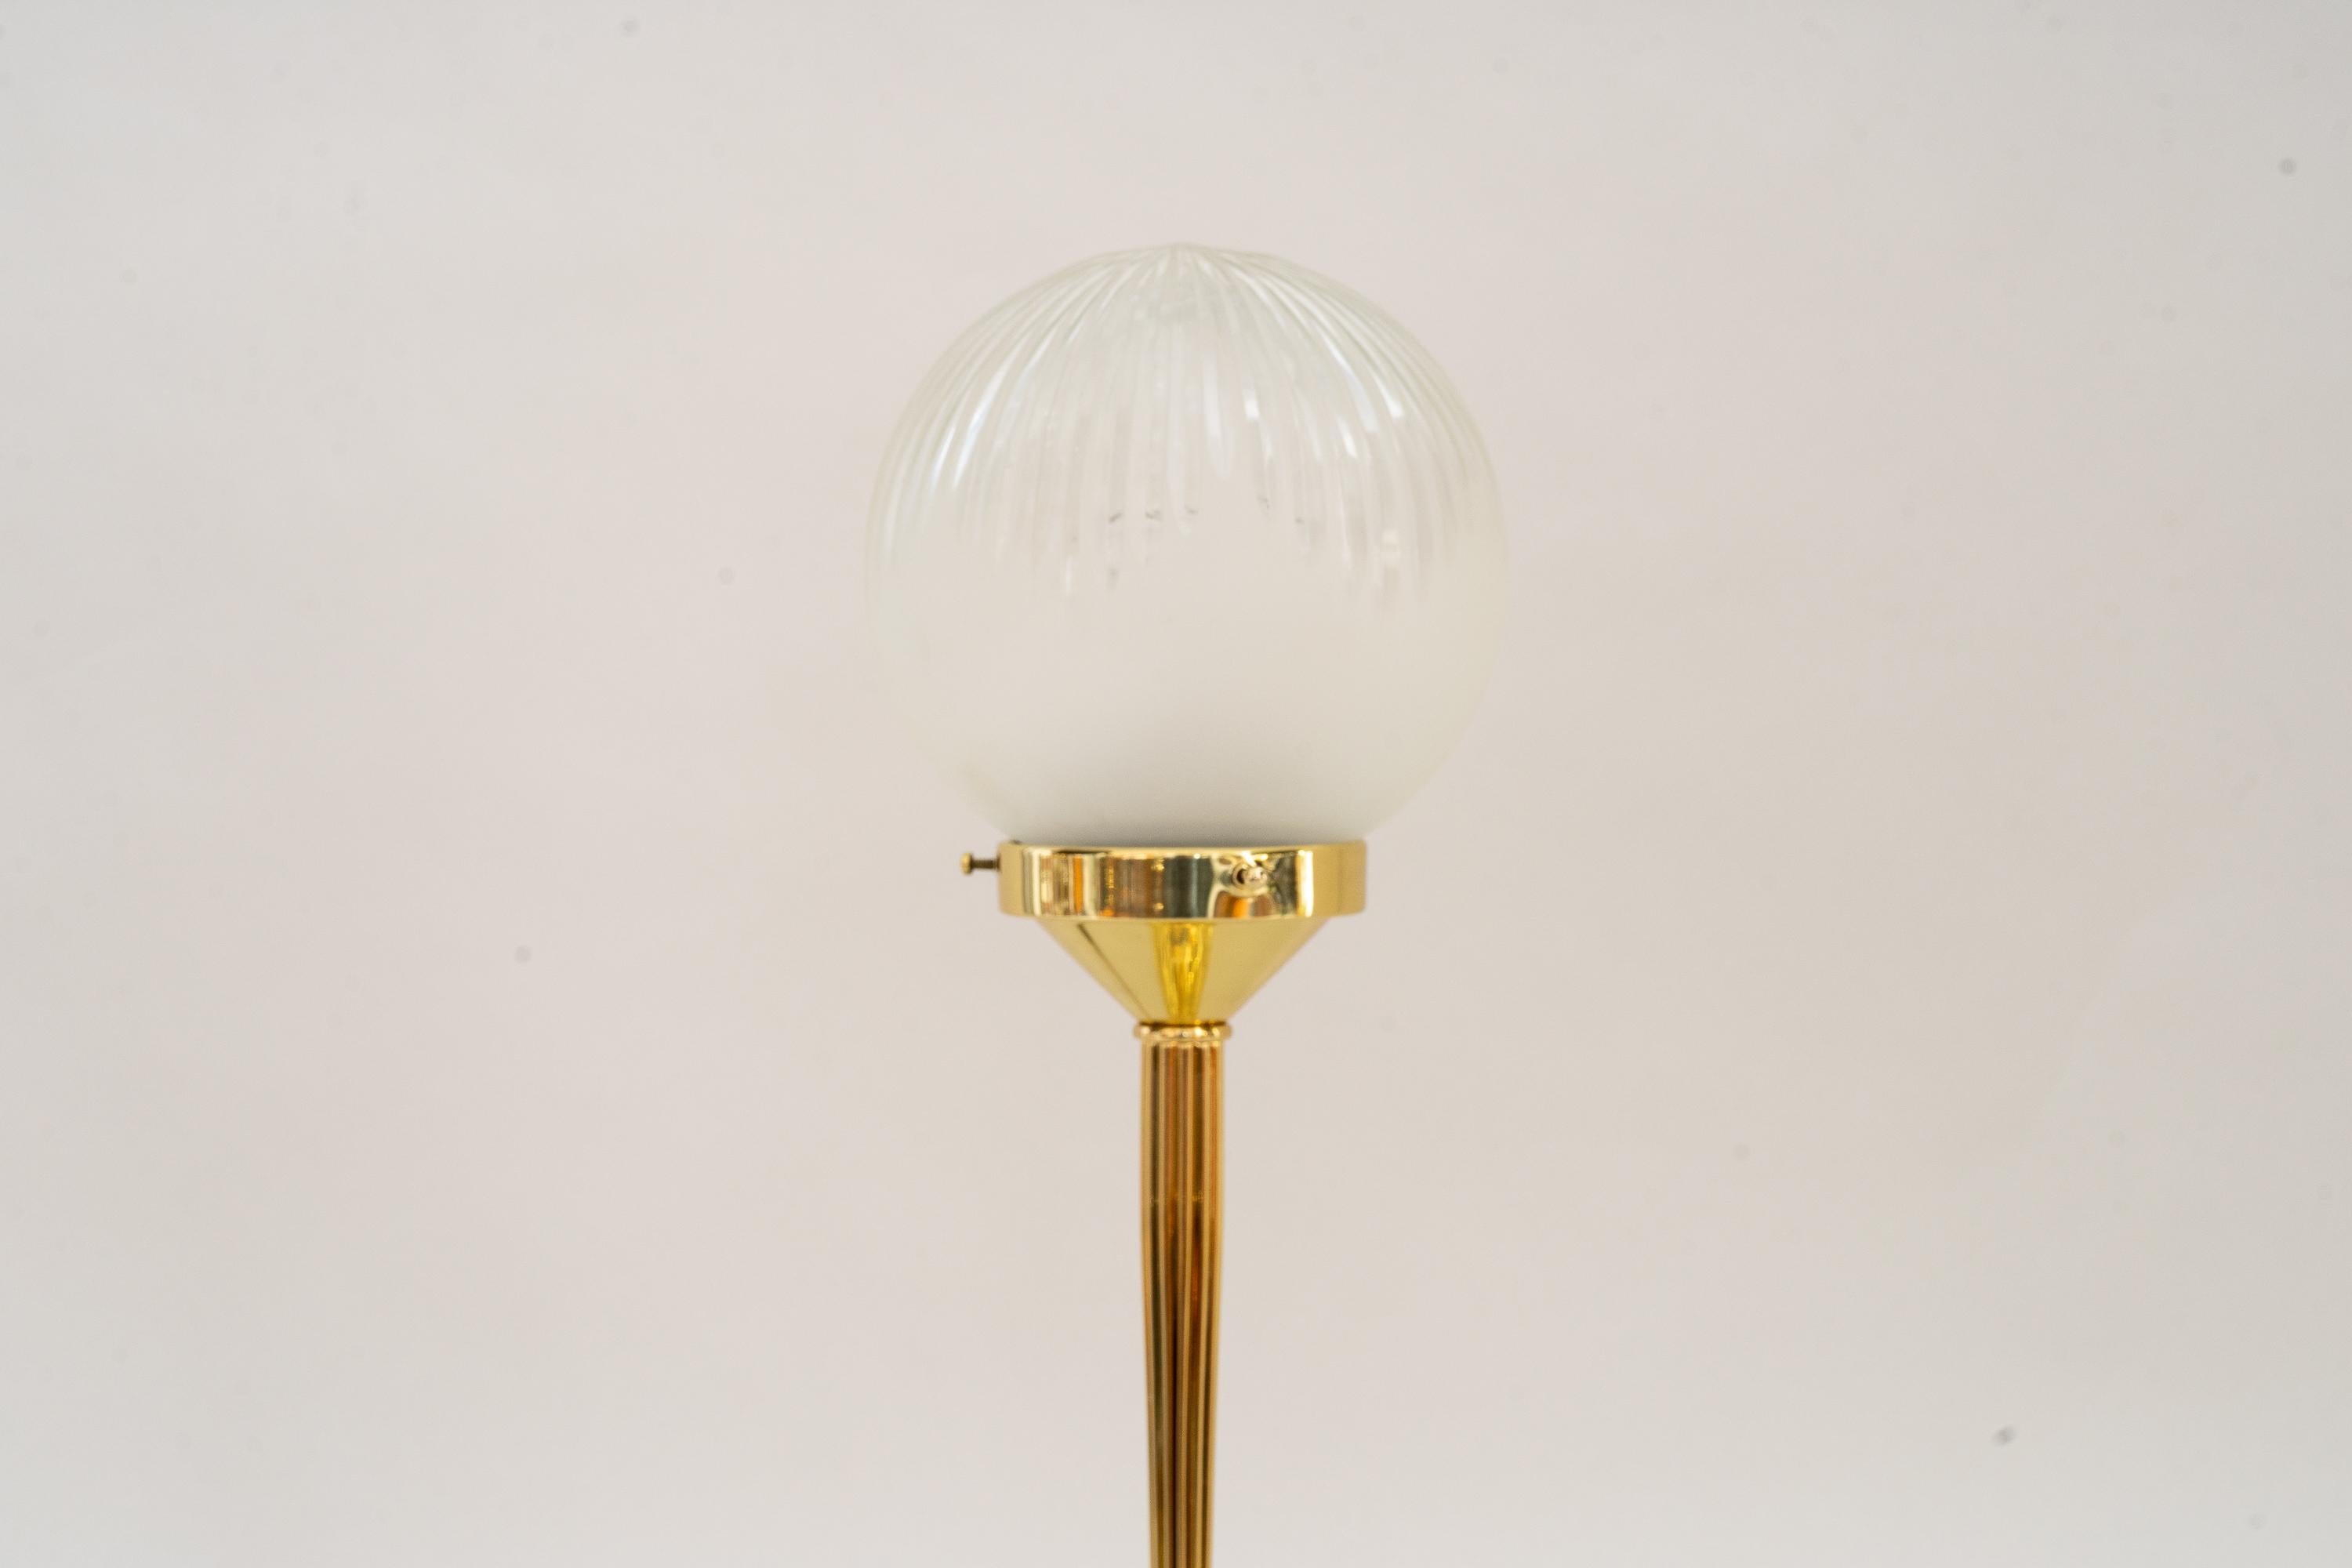 Art Deco Table lamp with original glass shade around 1920s
Polished and stove enamelled
Original glass shade.